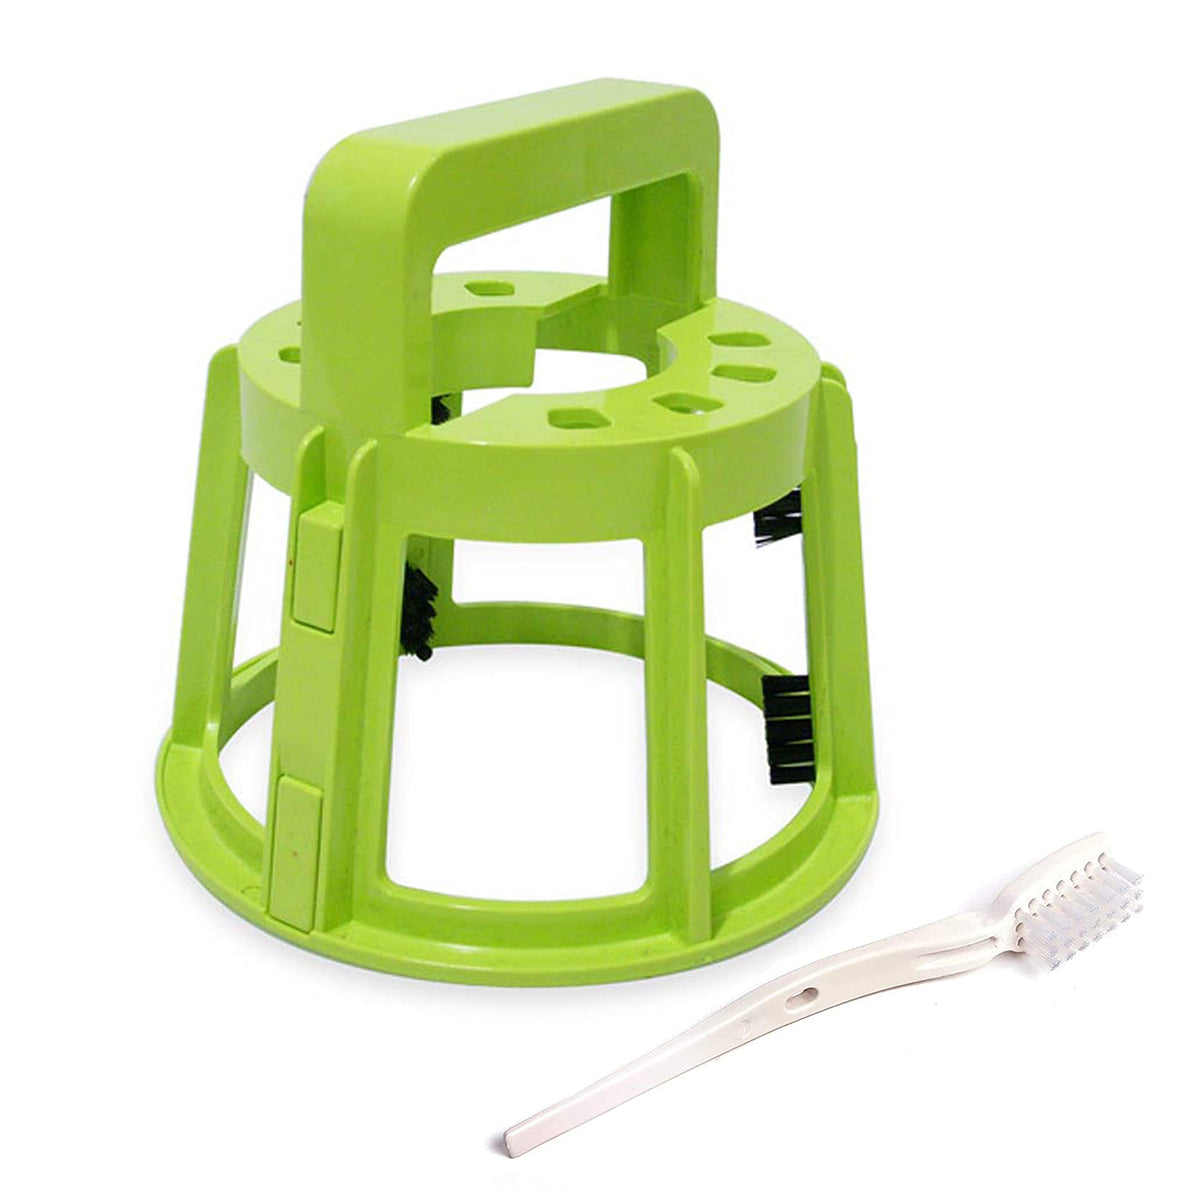 Kuvings B1700 Juicer Spares, Compatible only with Kuvings B1700 Cold Press Juicer only (Green Cleaning Tool)